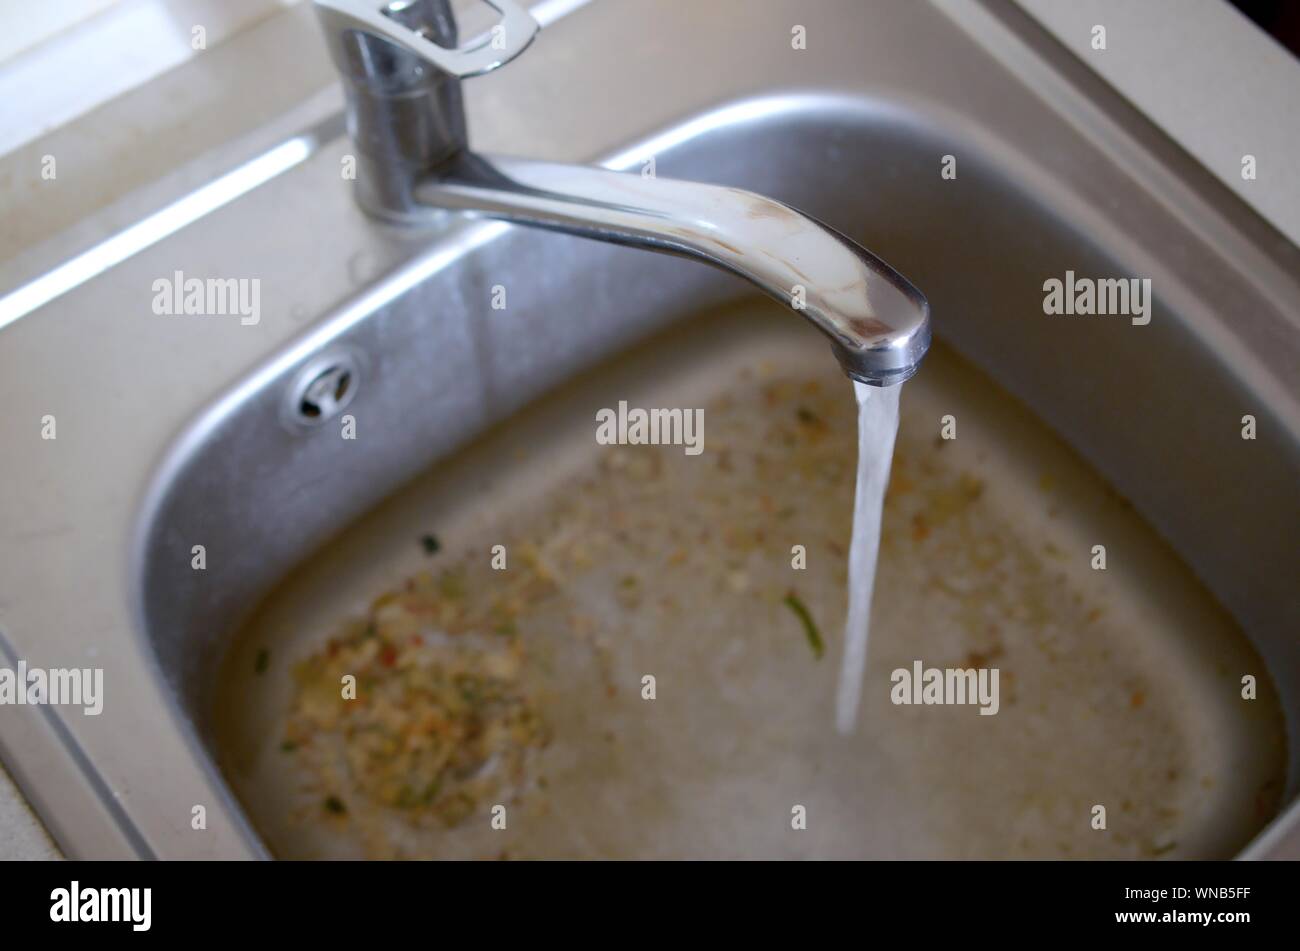 water clogged in sink